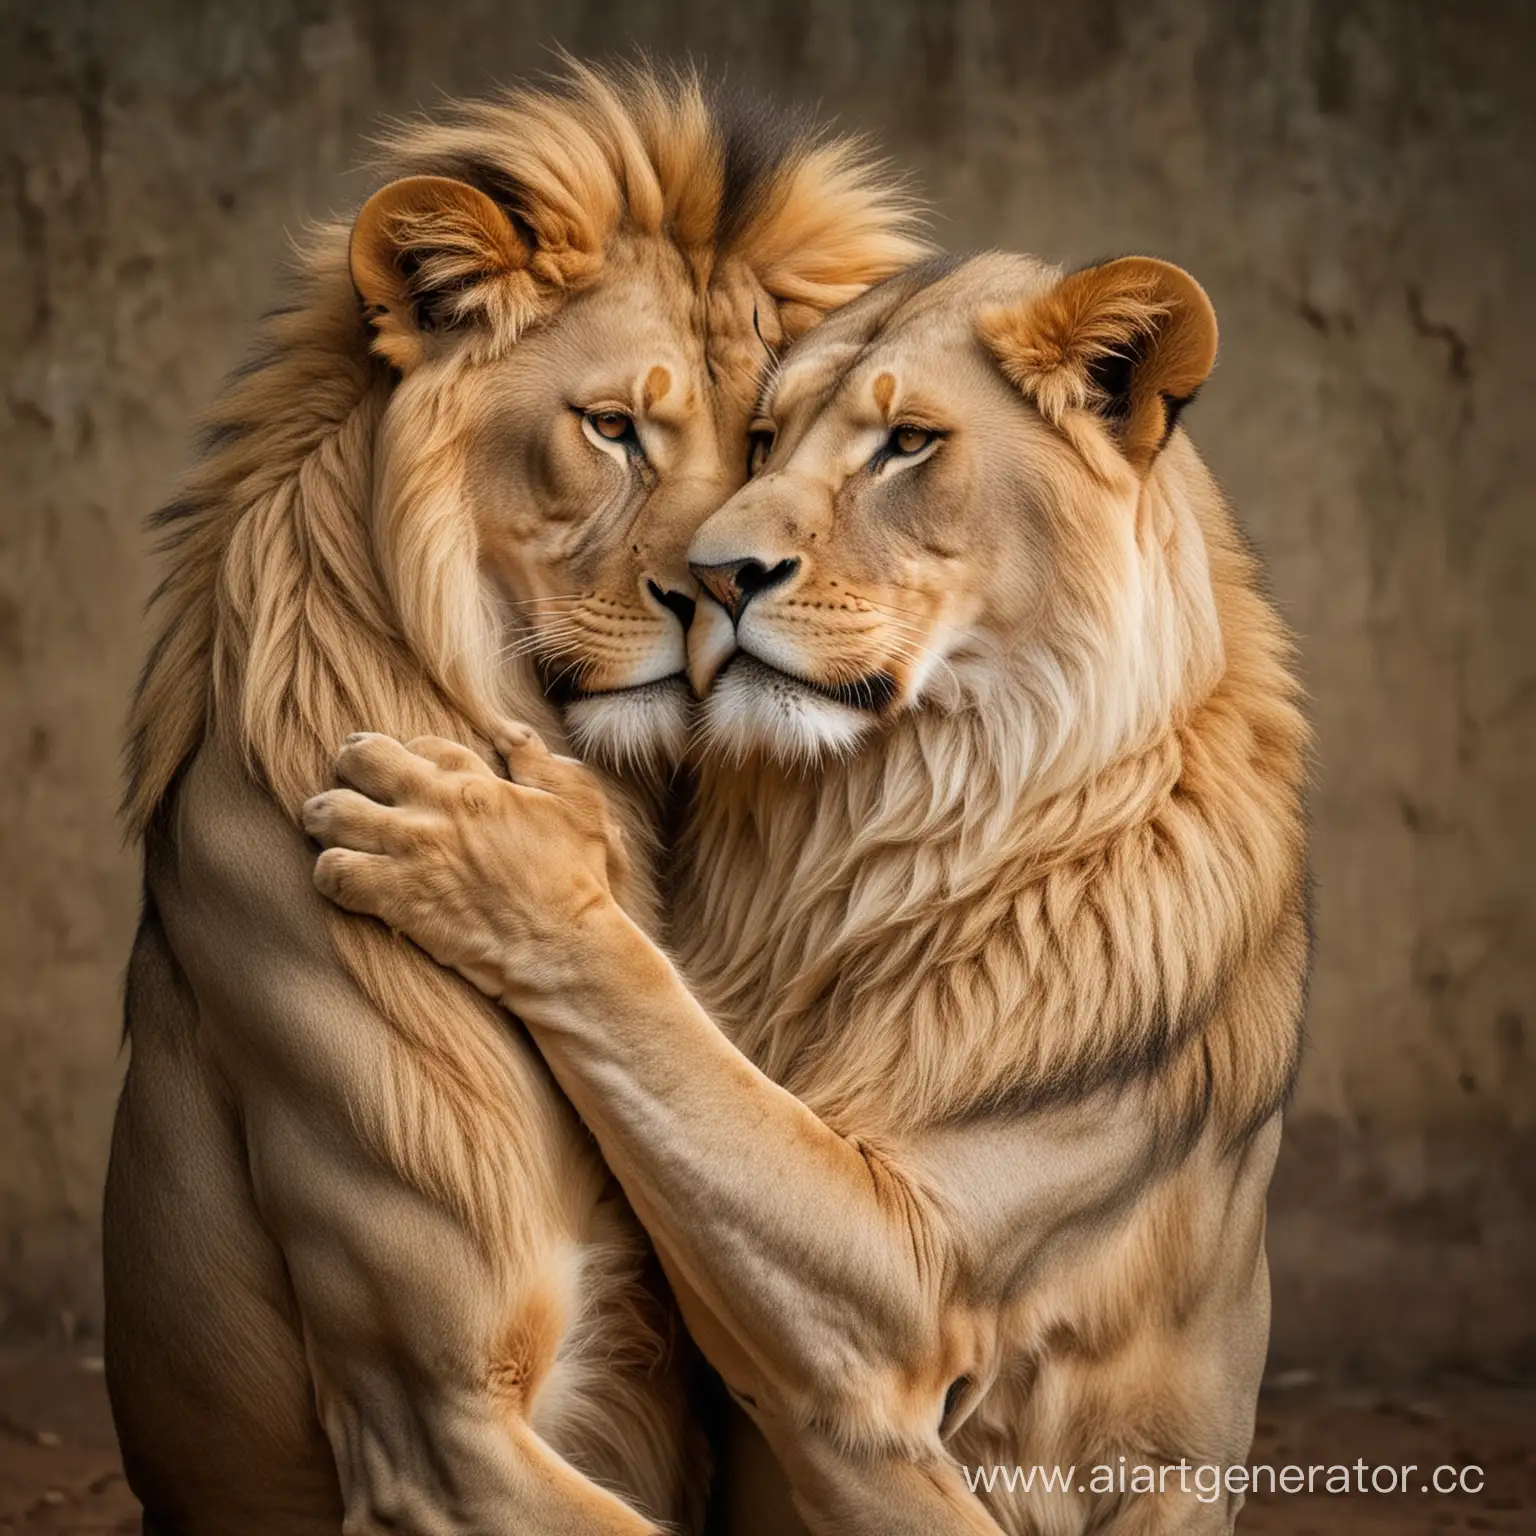 Embracing-Lion-Couple-Showing-Affectionate-Bond-in-Human-Pose